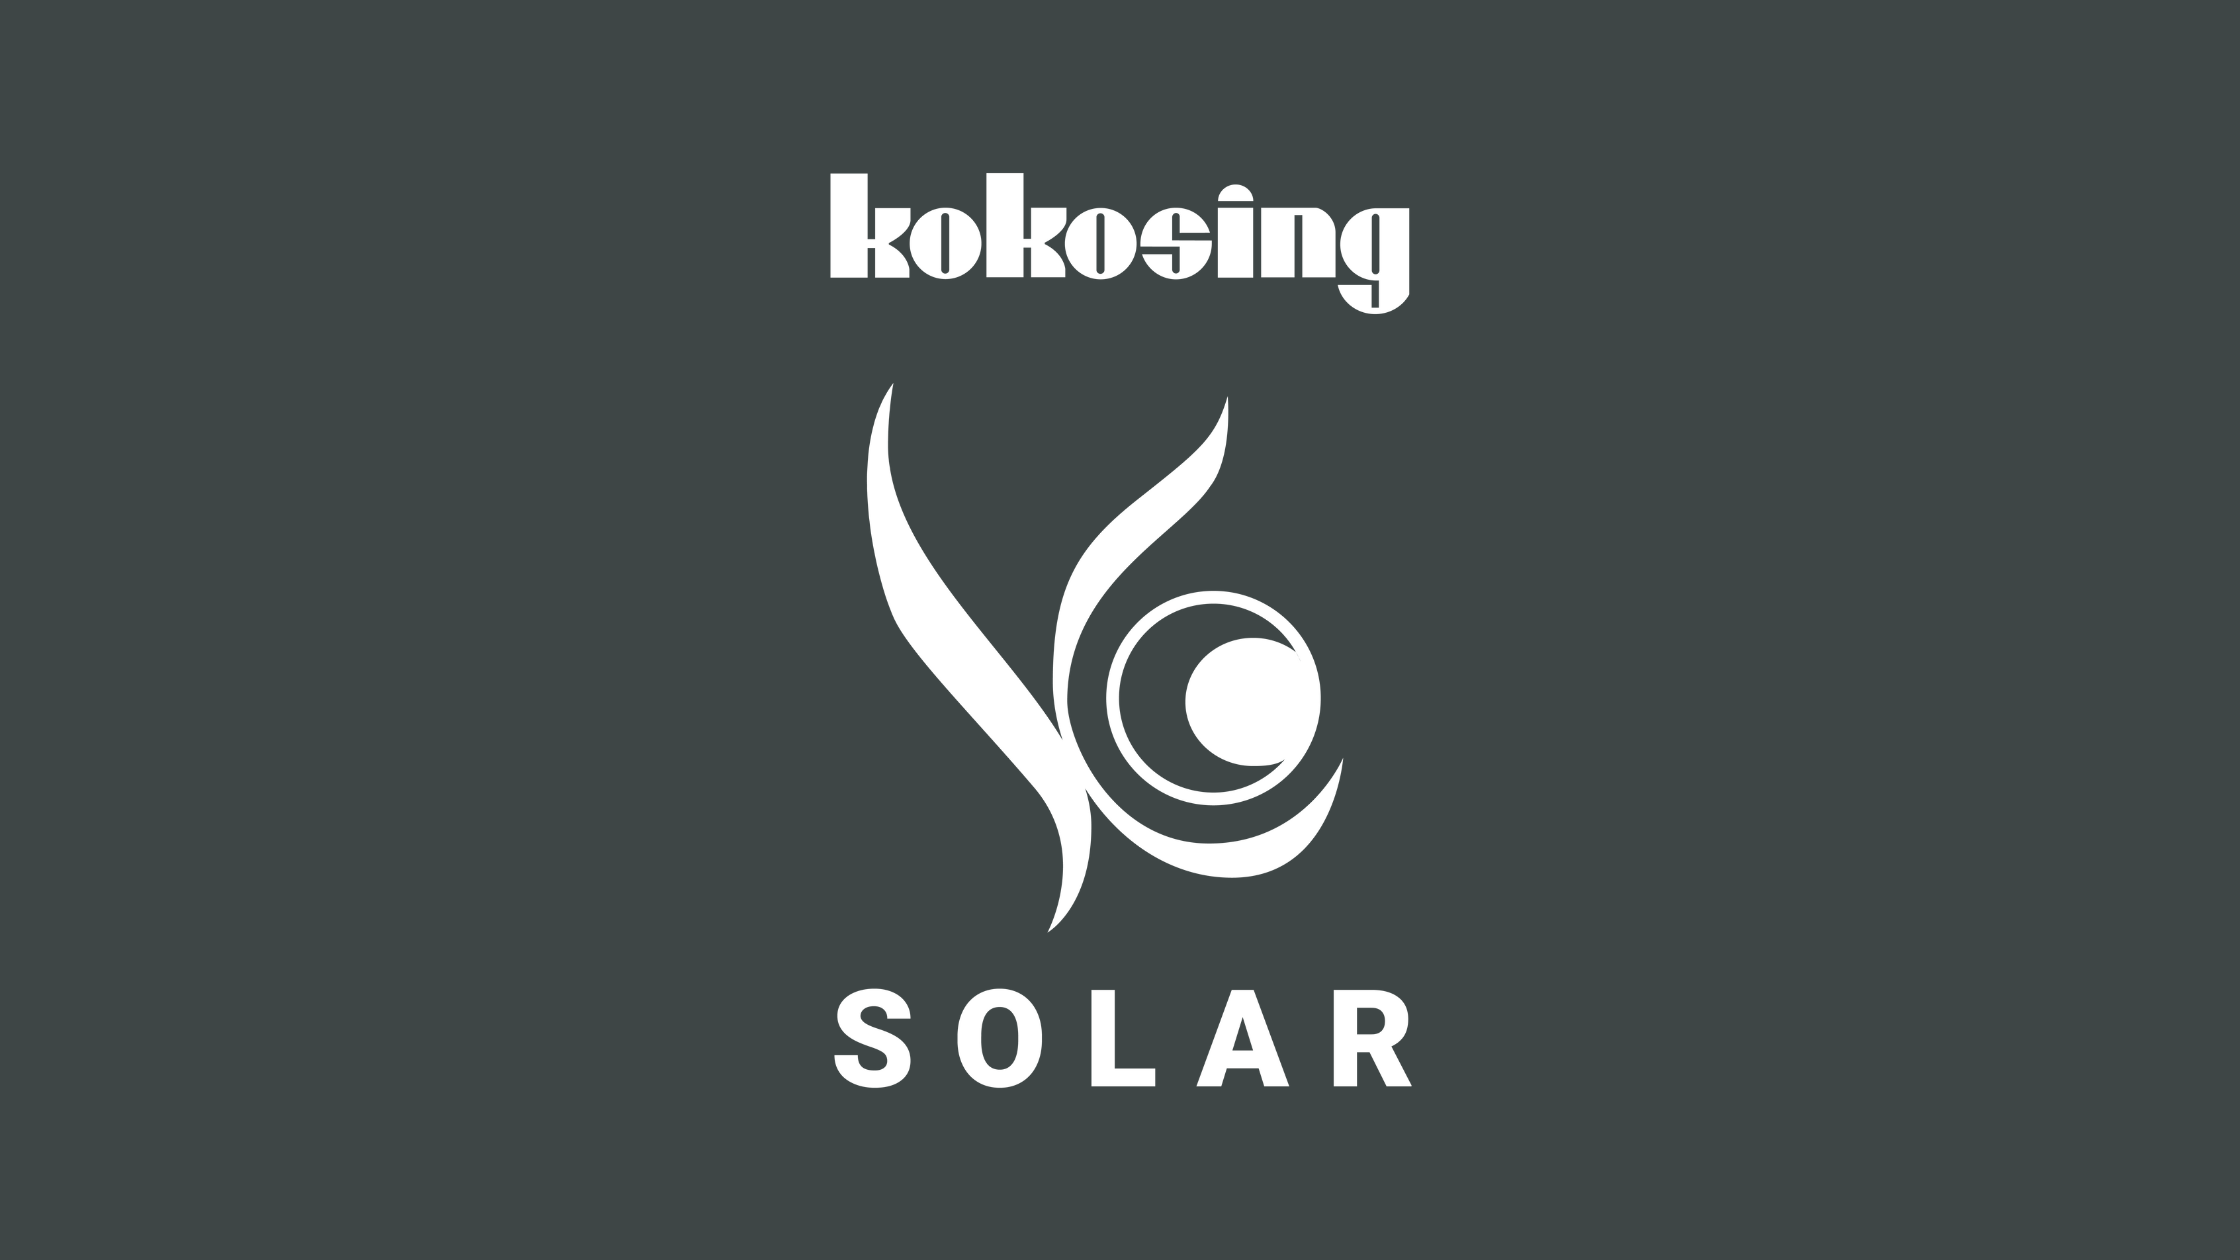 What Makes Kokosing Solar Different